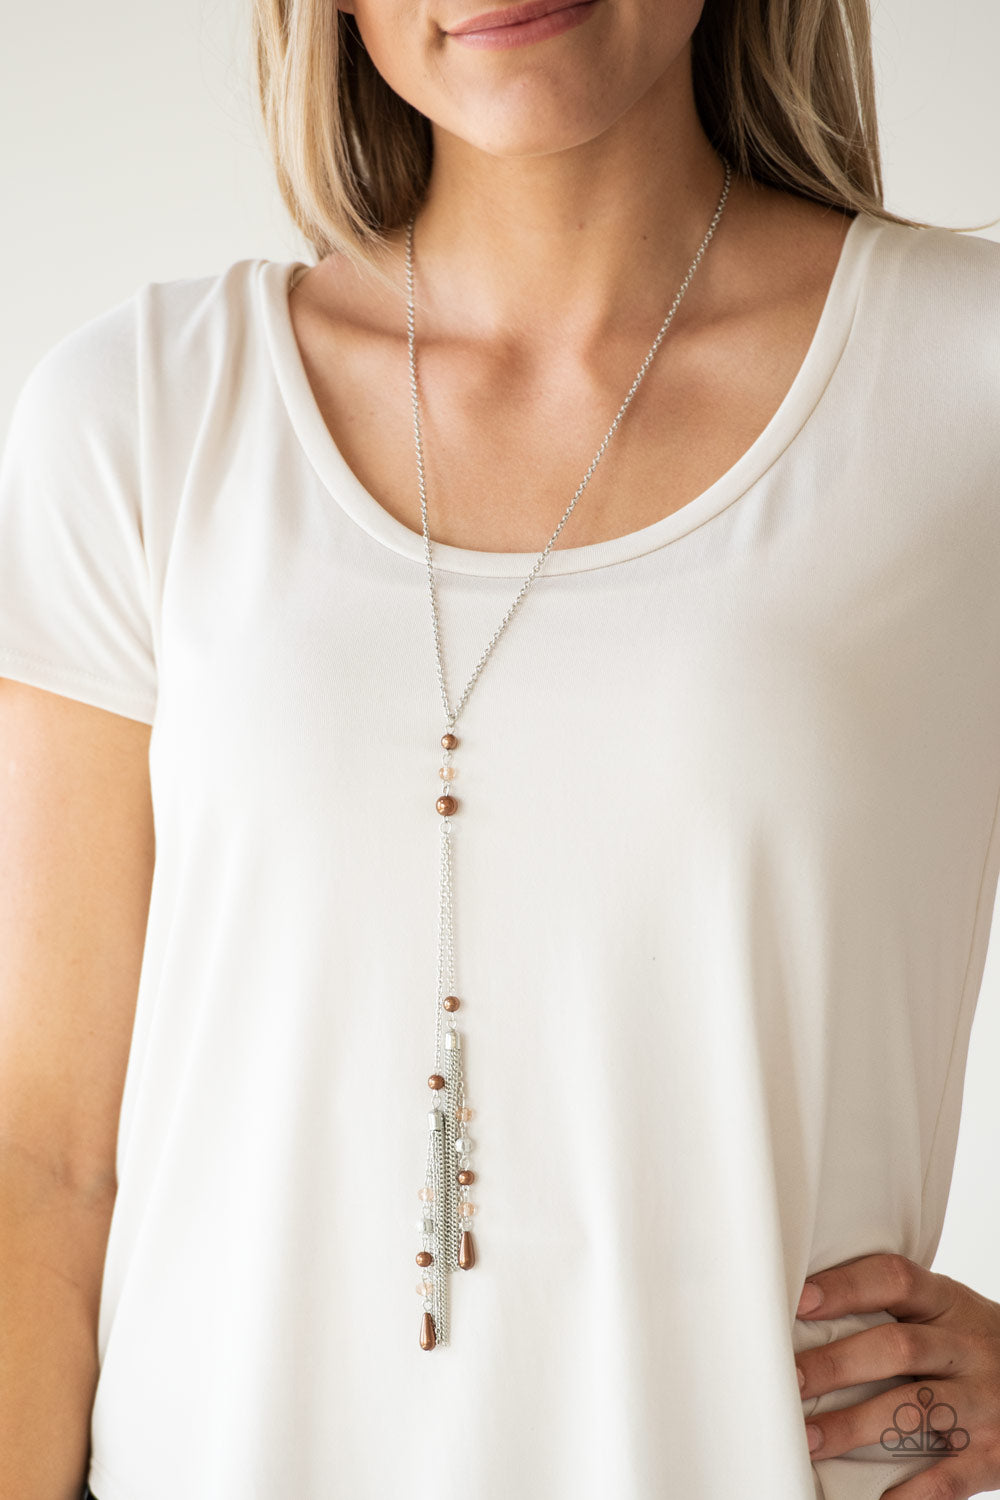 Timeless Tassels - Brown Necklace - Paparazzi Accessories